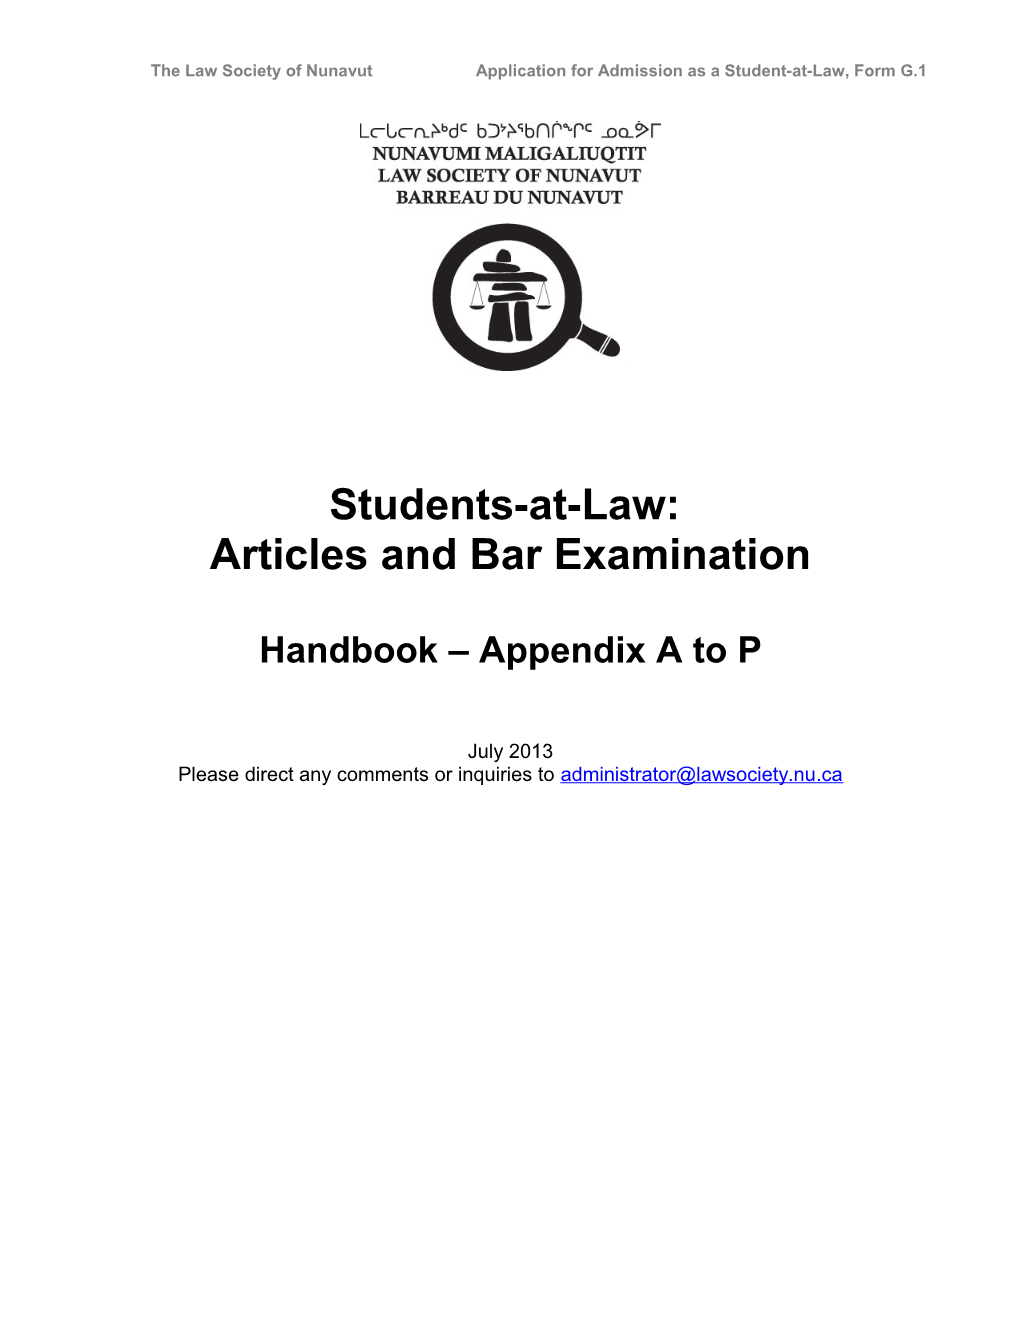 The Law Society of Nunavut Application for Admission As a Student-At-Law, Form G.1